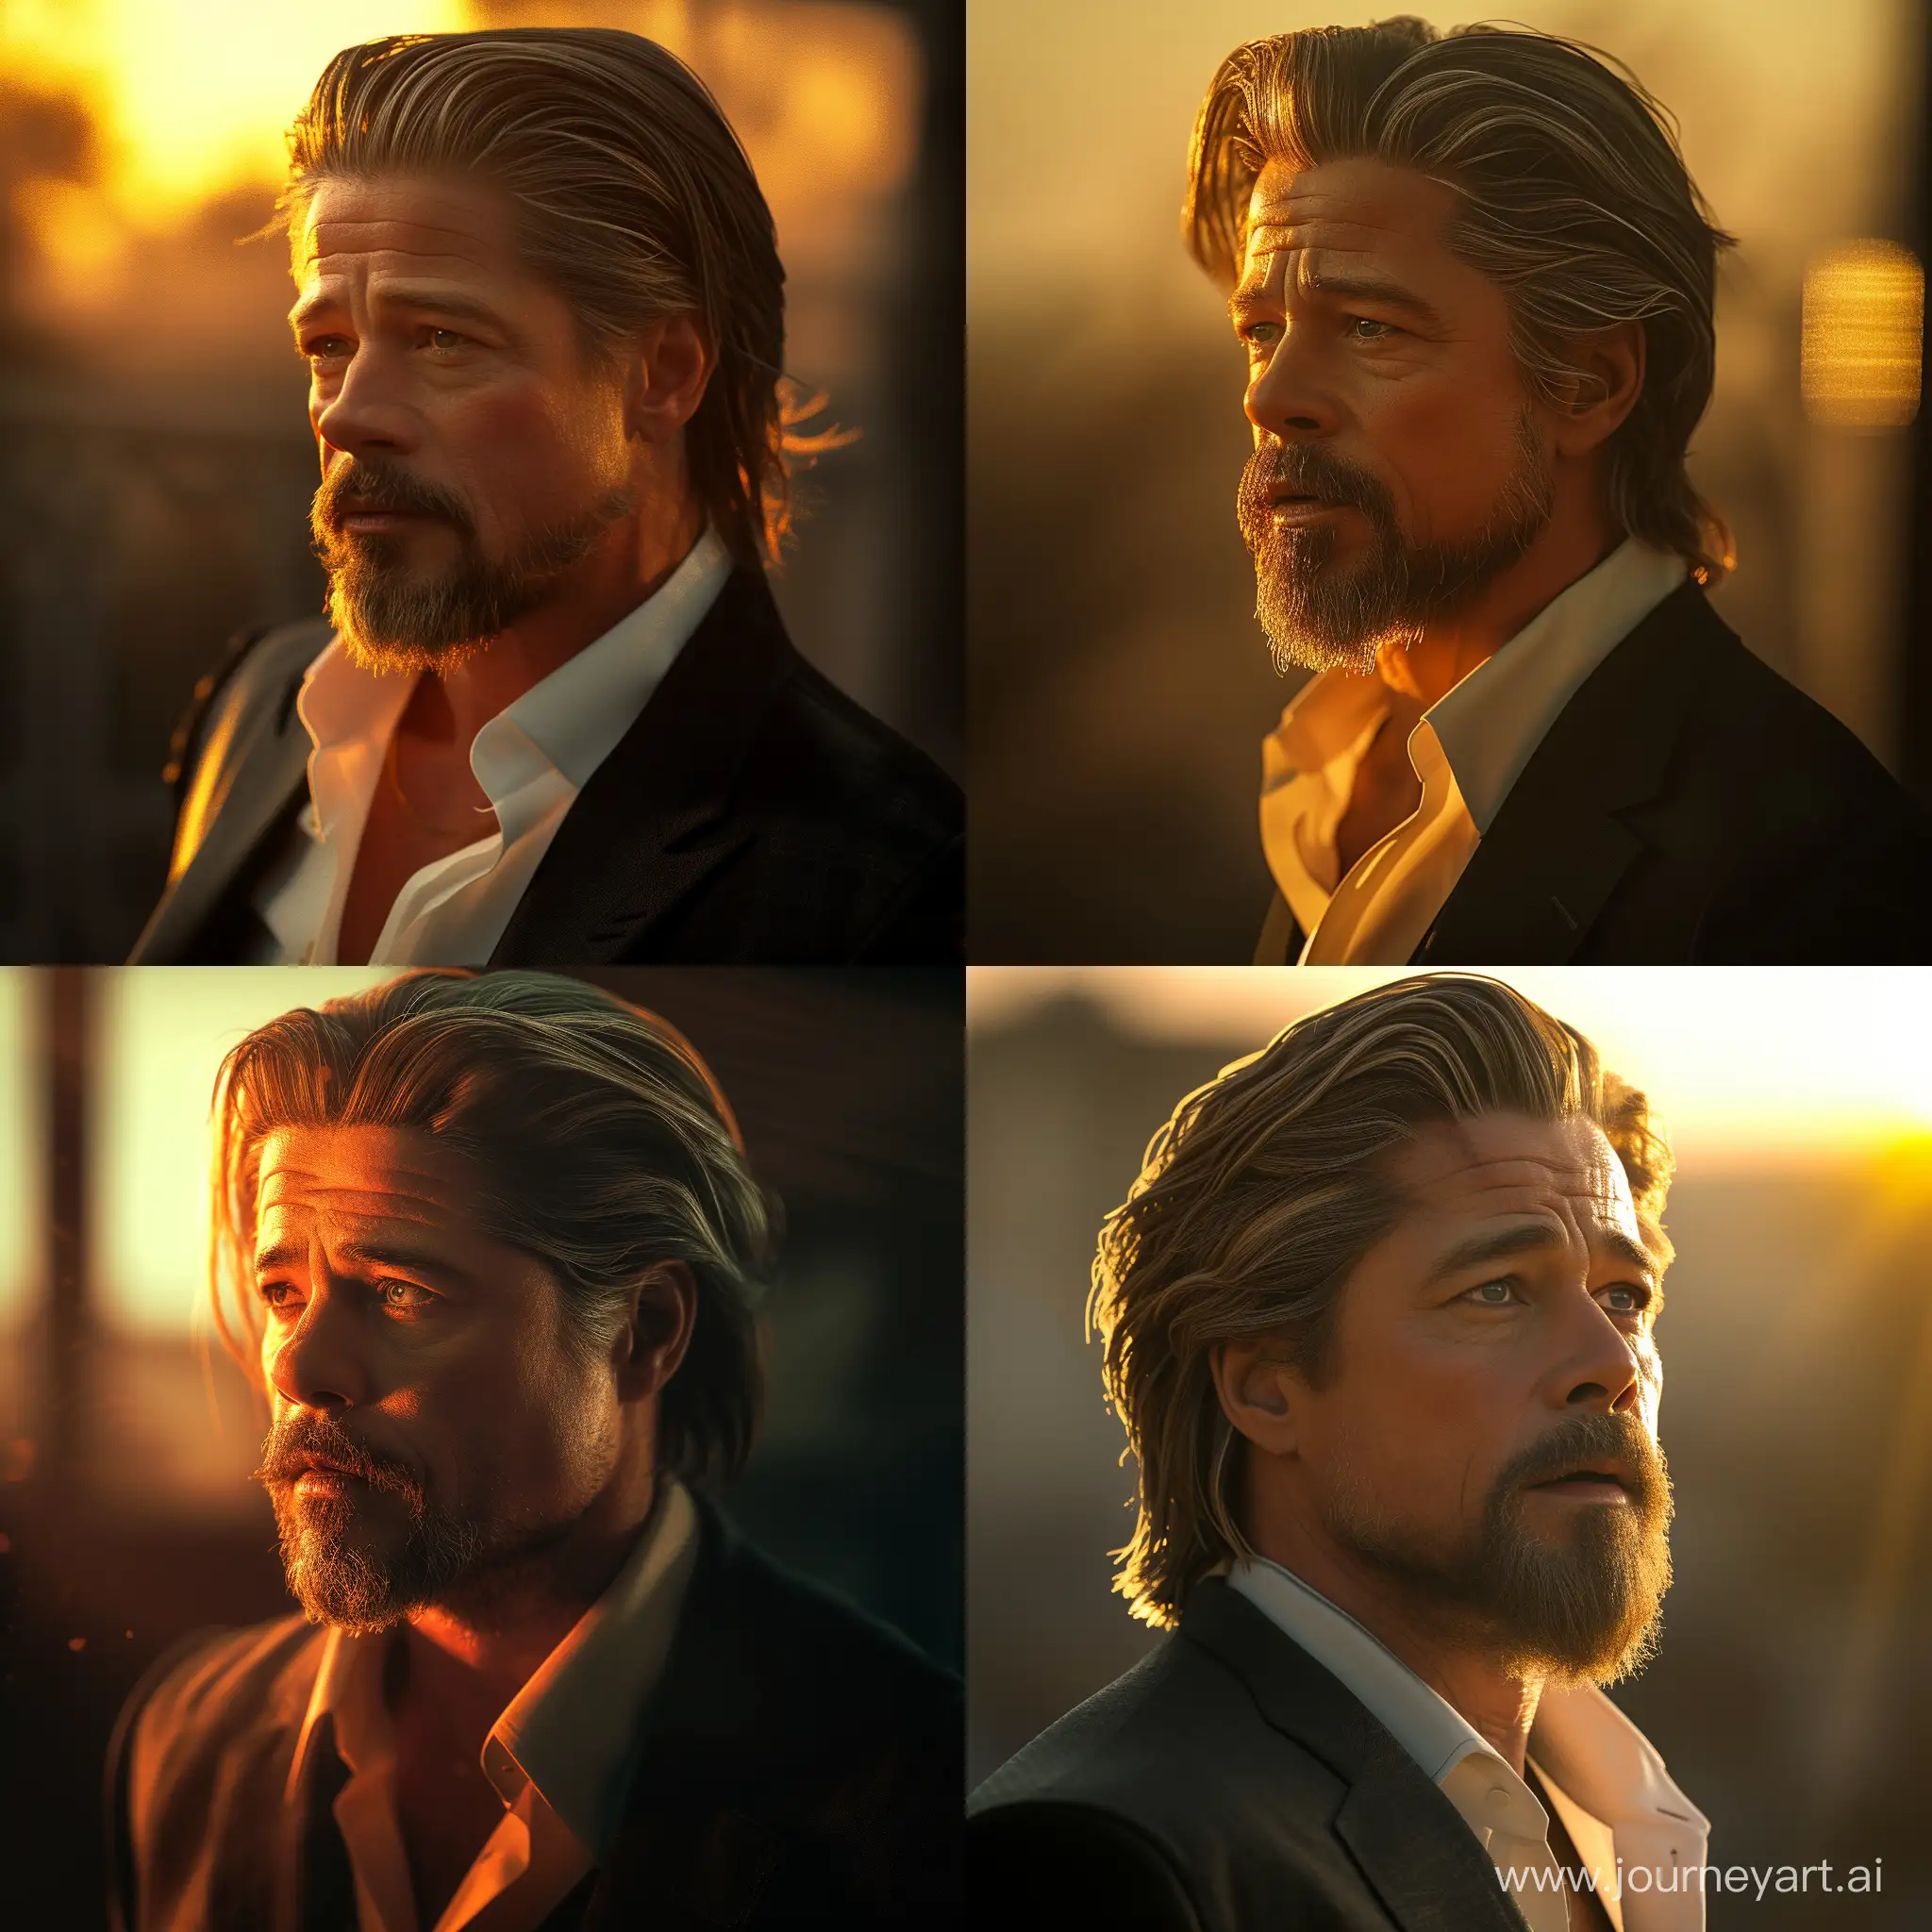 Creepy-Cinematic-Portrait-Brad-Pitt-in-Formal-Outfit-with-Medium-Hair-and-Beard